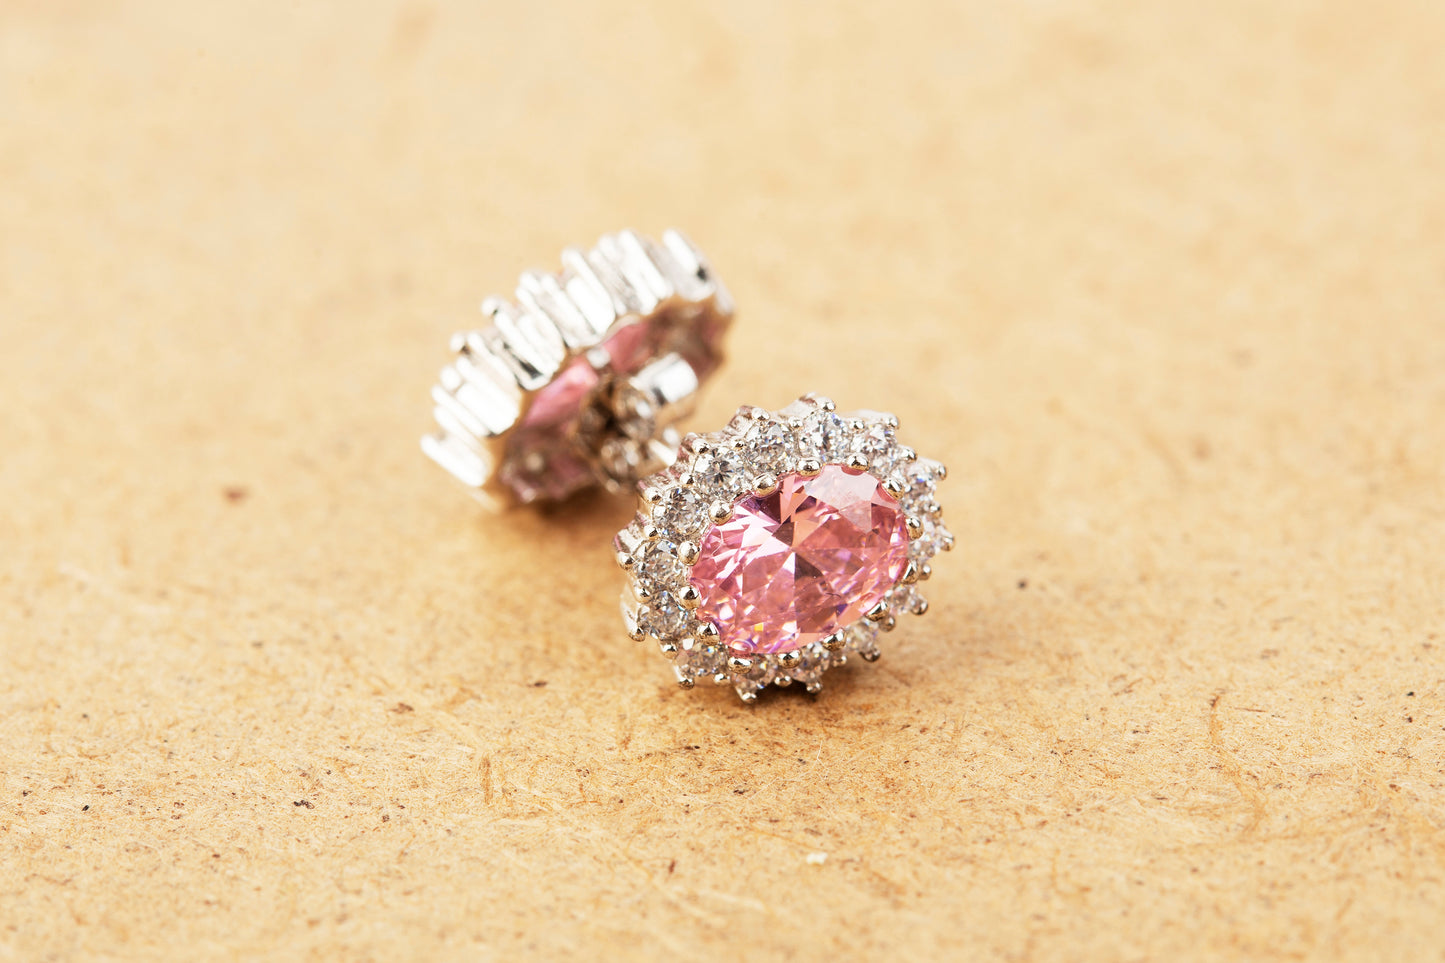 Baby Pink Hand made Zircon silver Earrings (925 Sterling Silver)